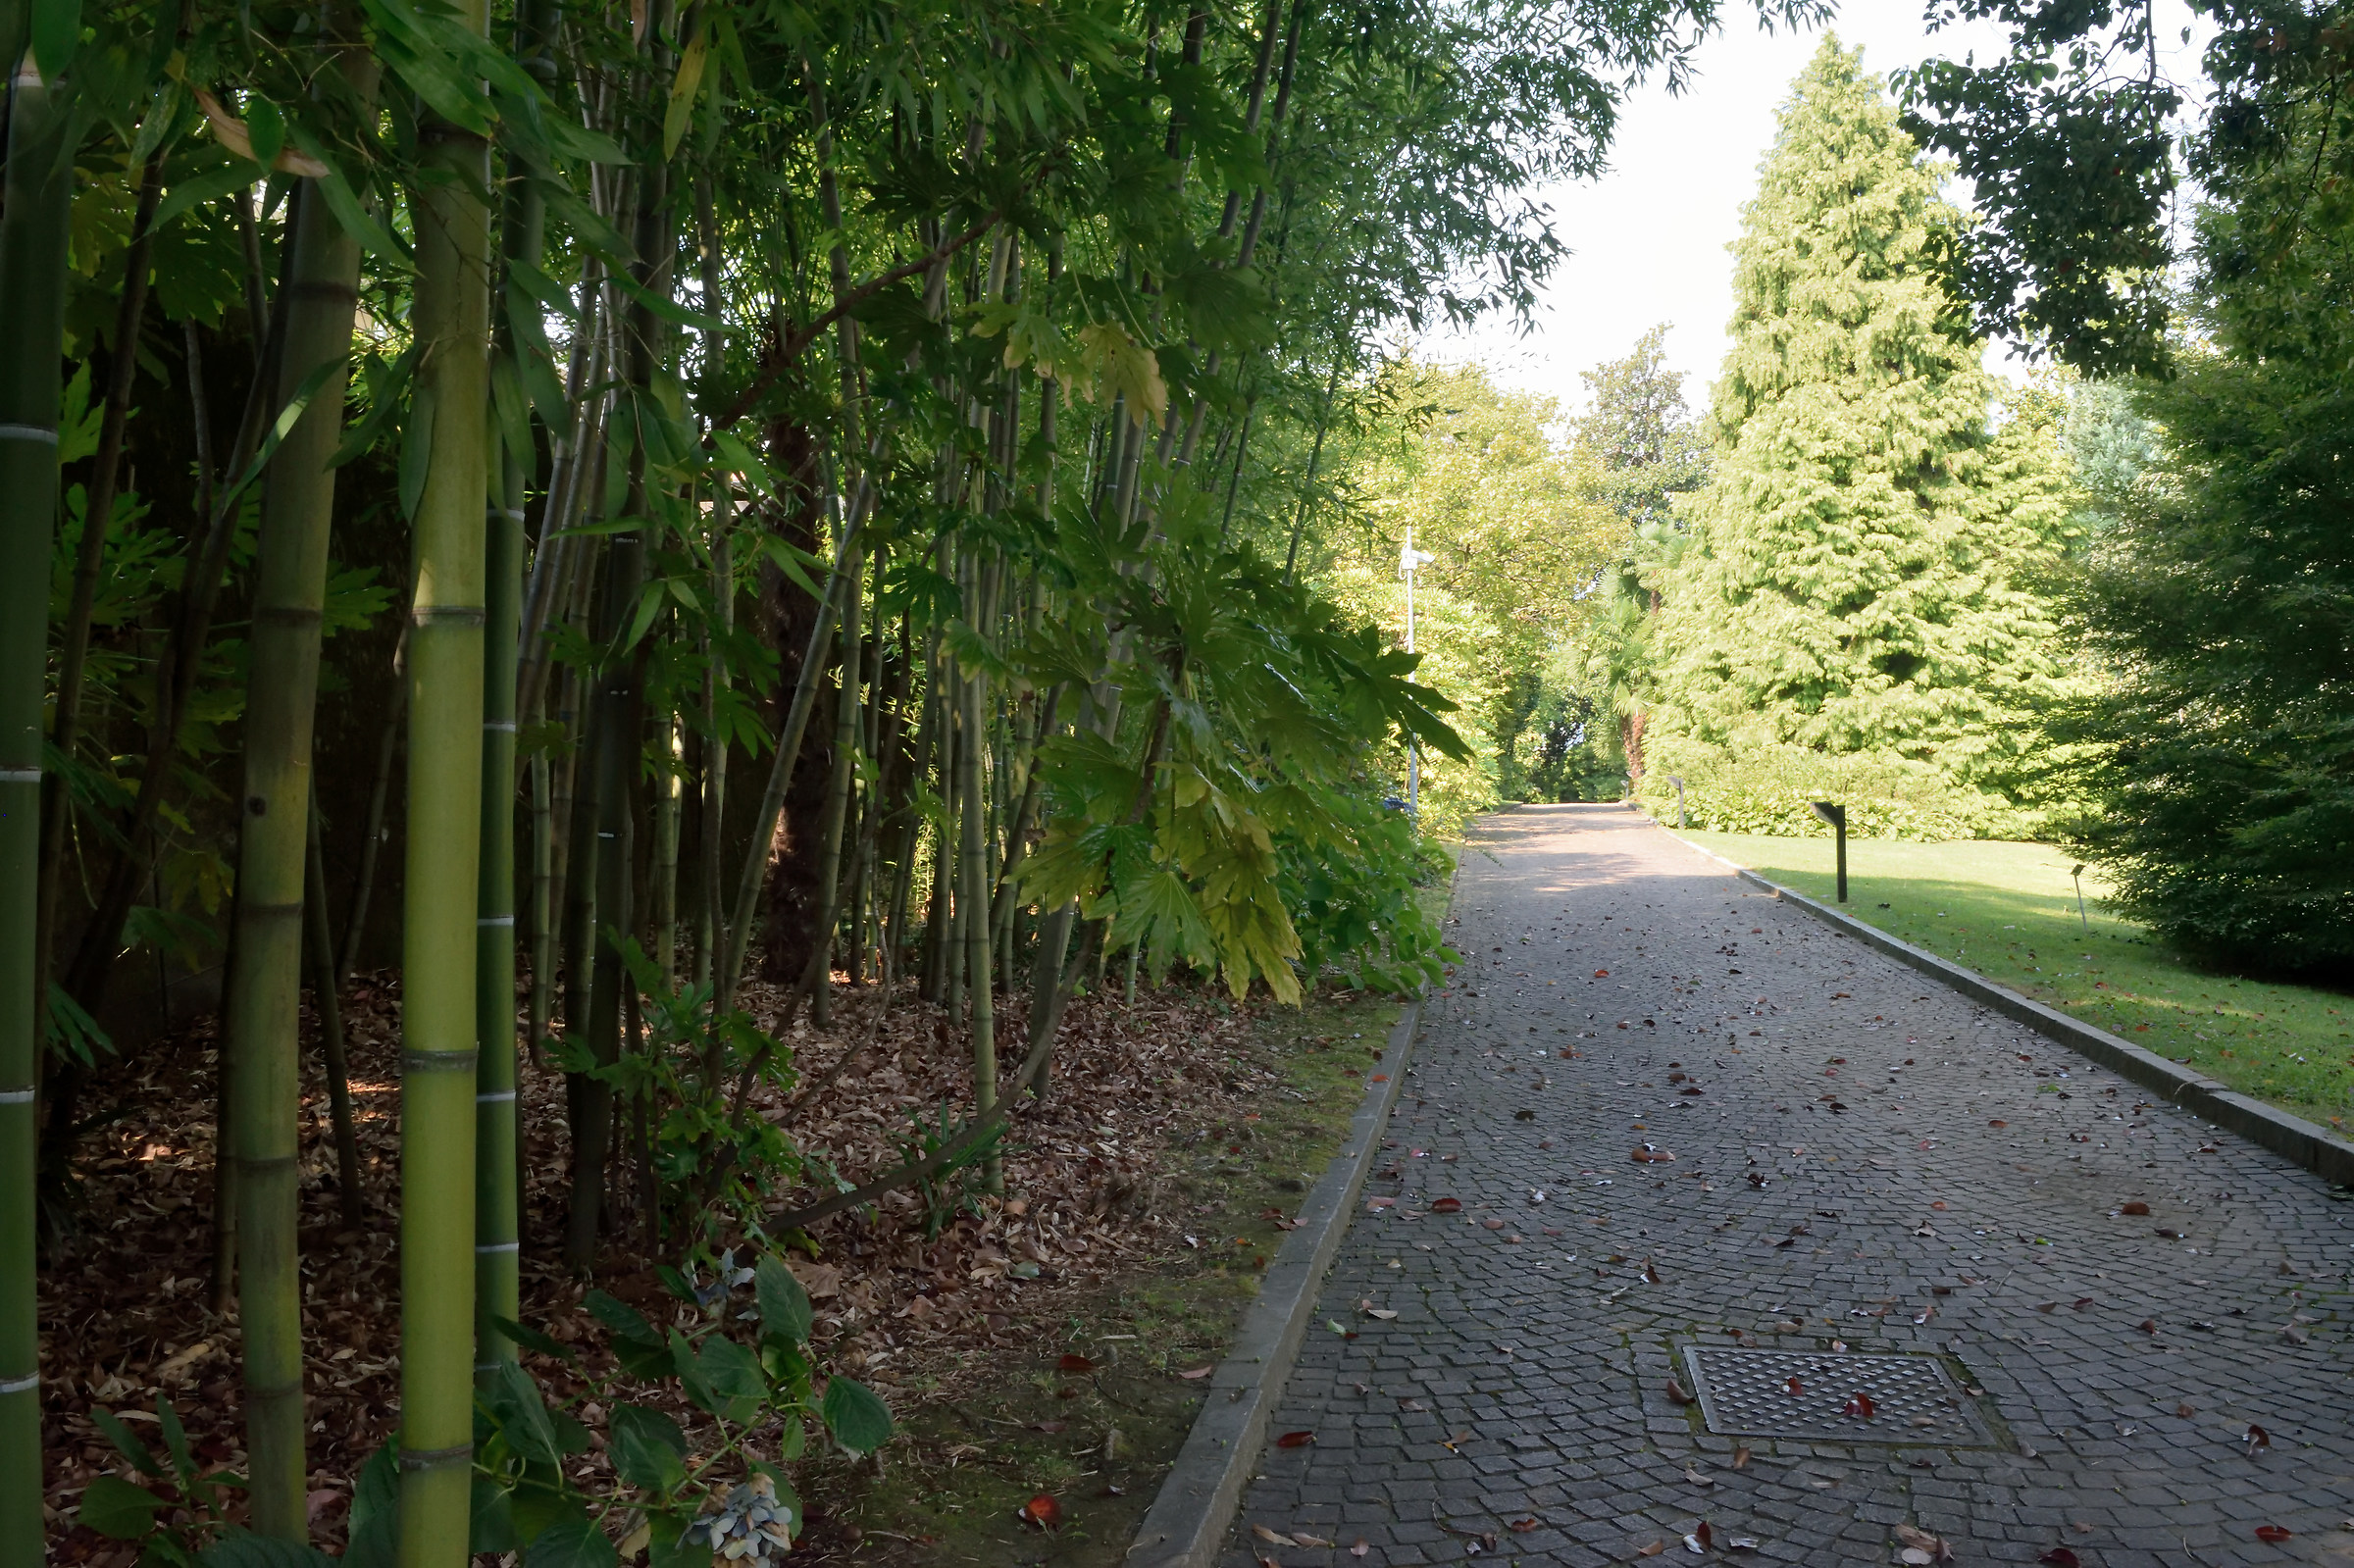 The avenue of bamboo...